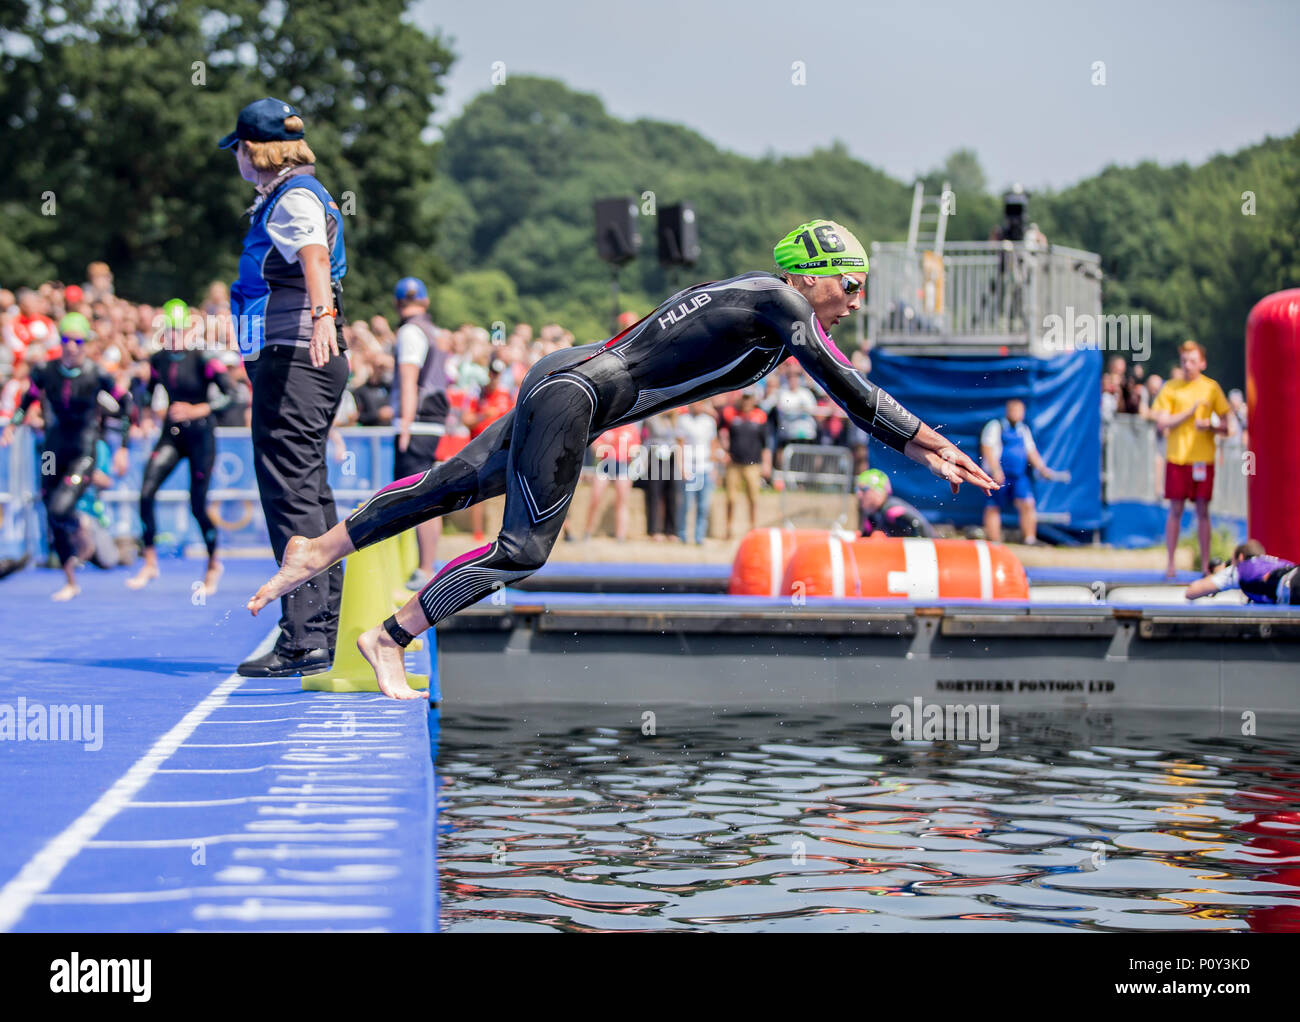 Leeds, UK. 10th June, 2018. AJ Bell World Triathlon Series, Leeds; Jessica Learmonth (GBR) takes the lead as she starts her second lap in the swim during the Elite Womens race of the AJ Bell World Triathlon Leeds Credit: Action Plus Sports/Alamy Live News Stock Photo